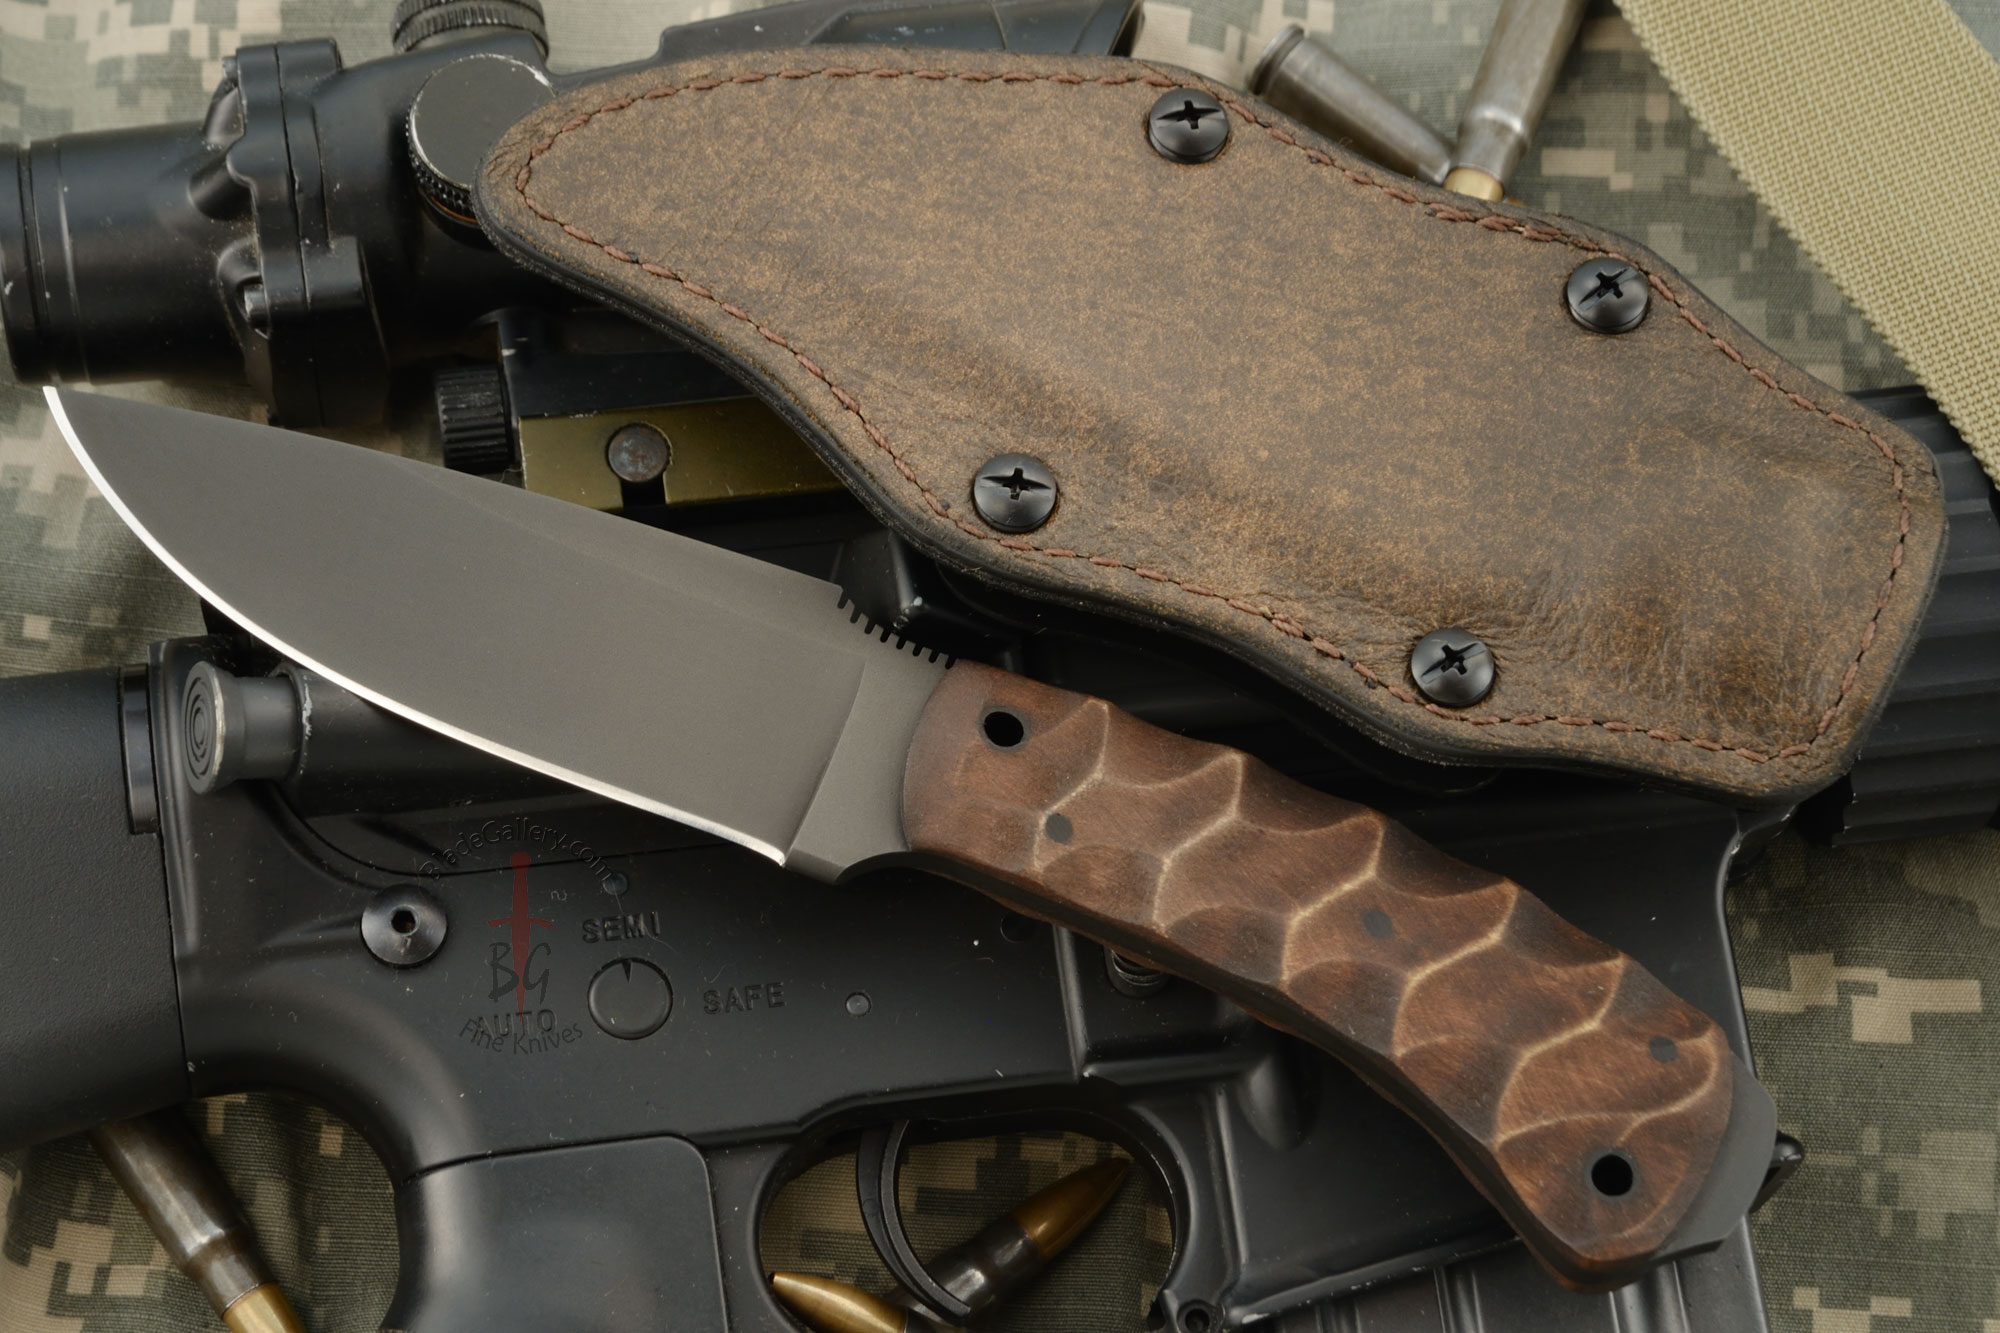 BladeConnection: Practical and Tactical Knives for Daily Carry